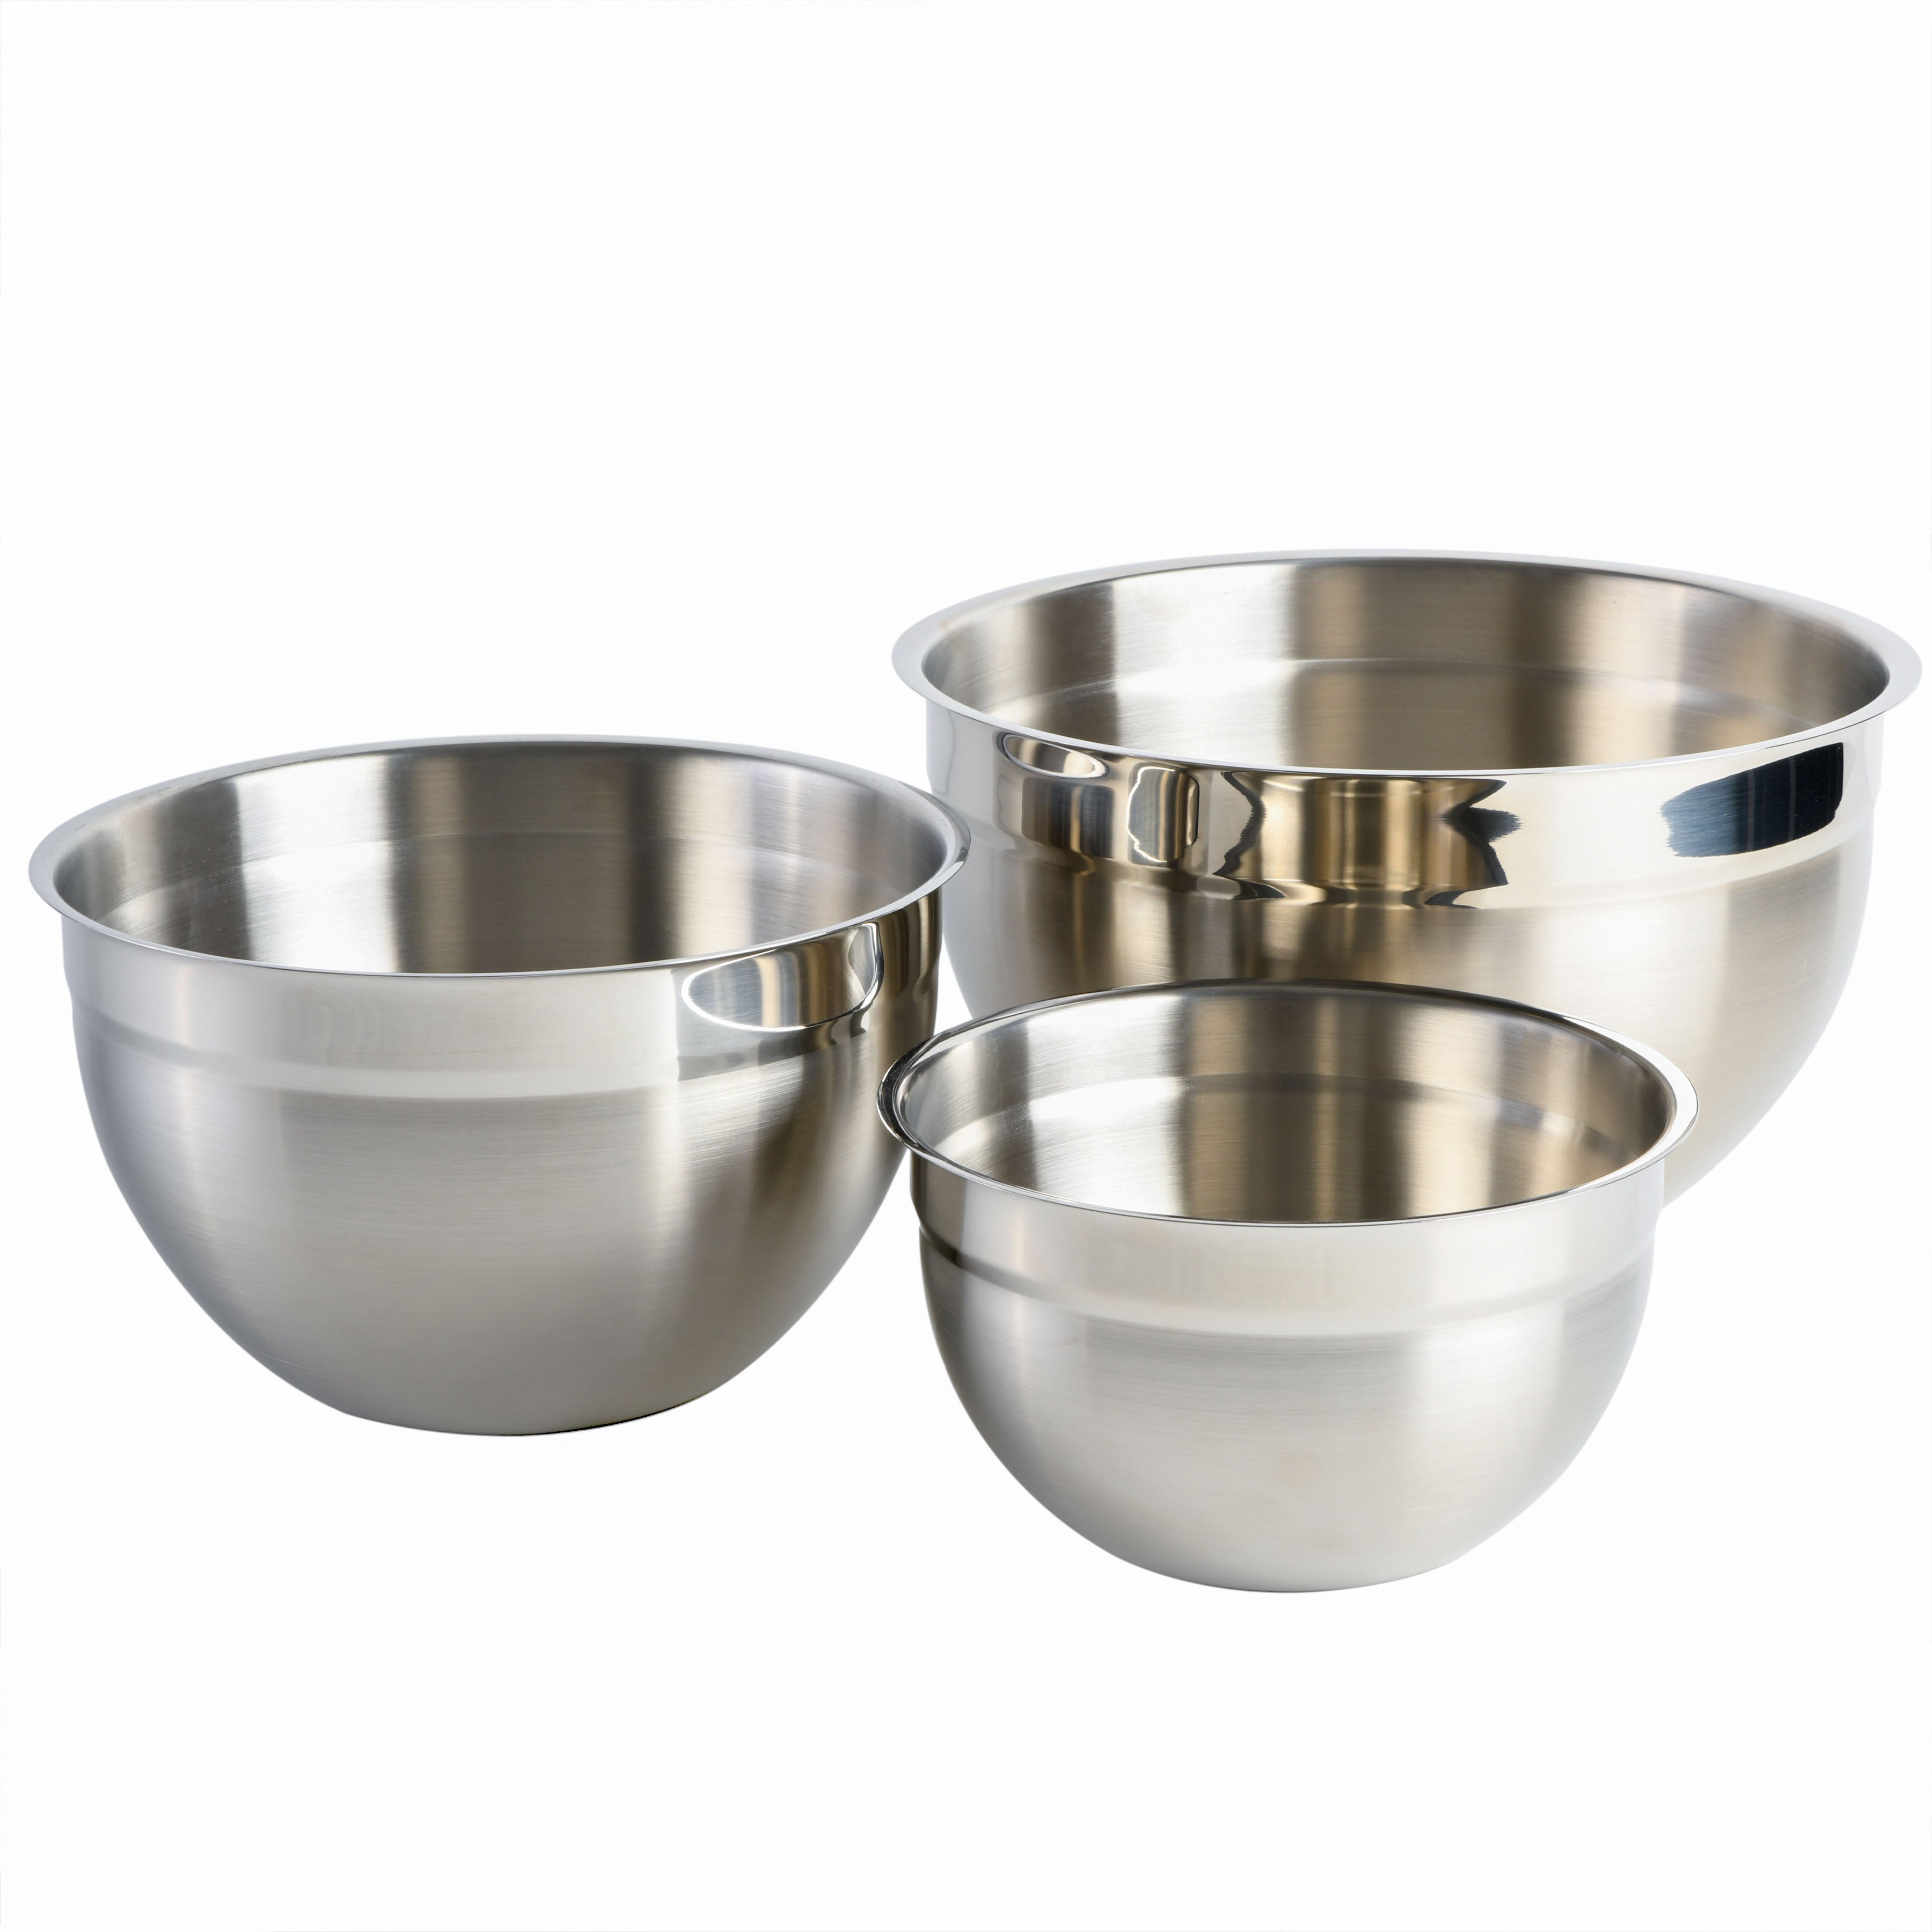 Mainstays SS 8QT Multi-Use Mixing Bowl for Prepping, Serving or Storage 